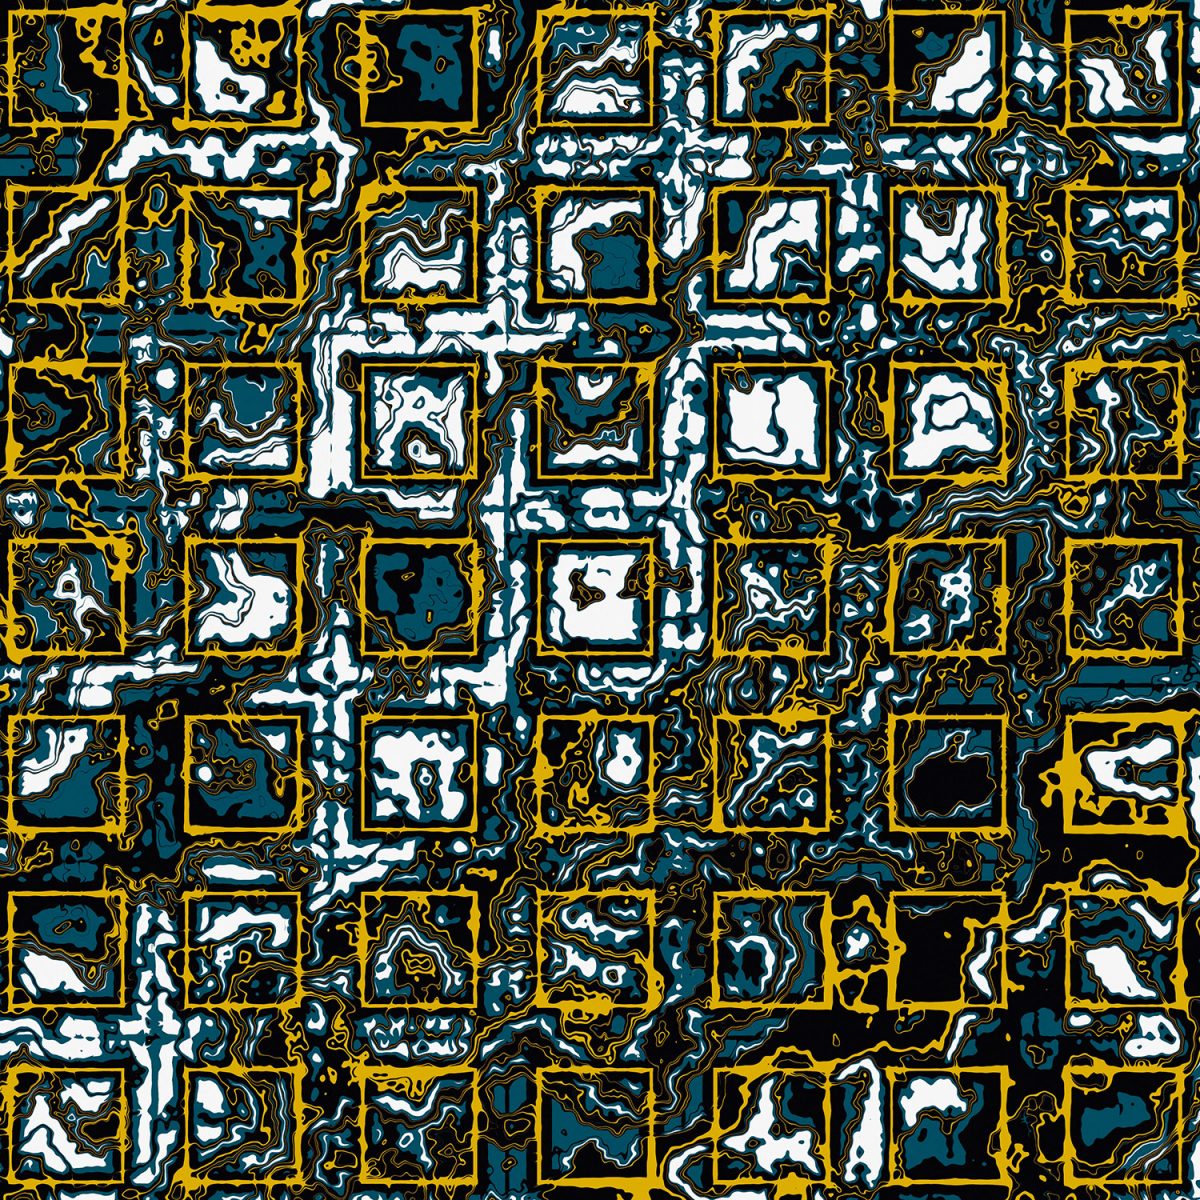 Procedurally generated illustrated pattern